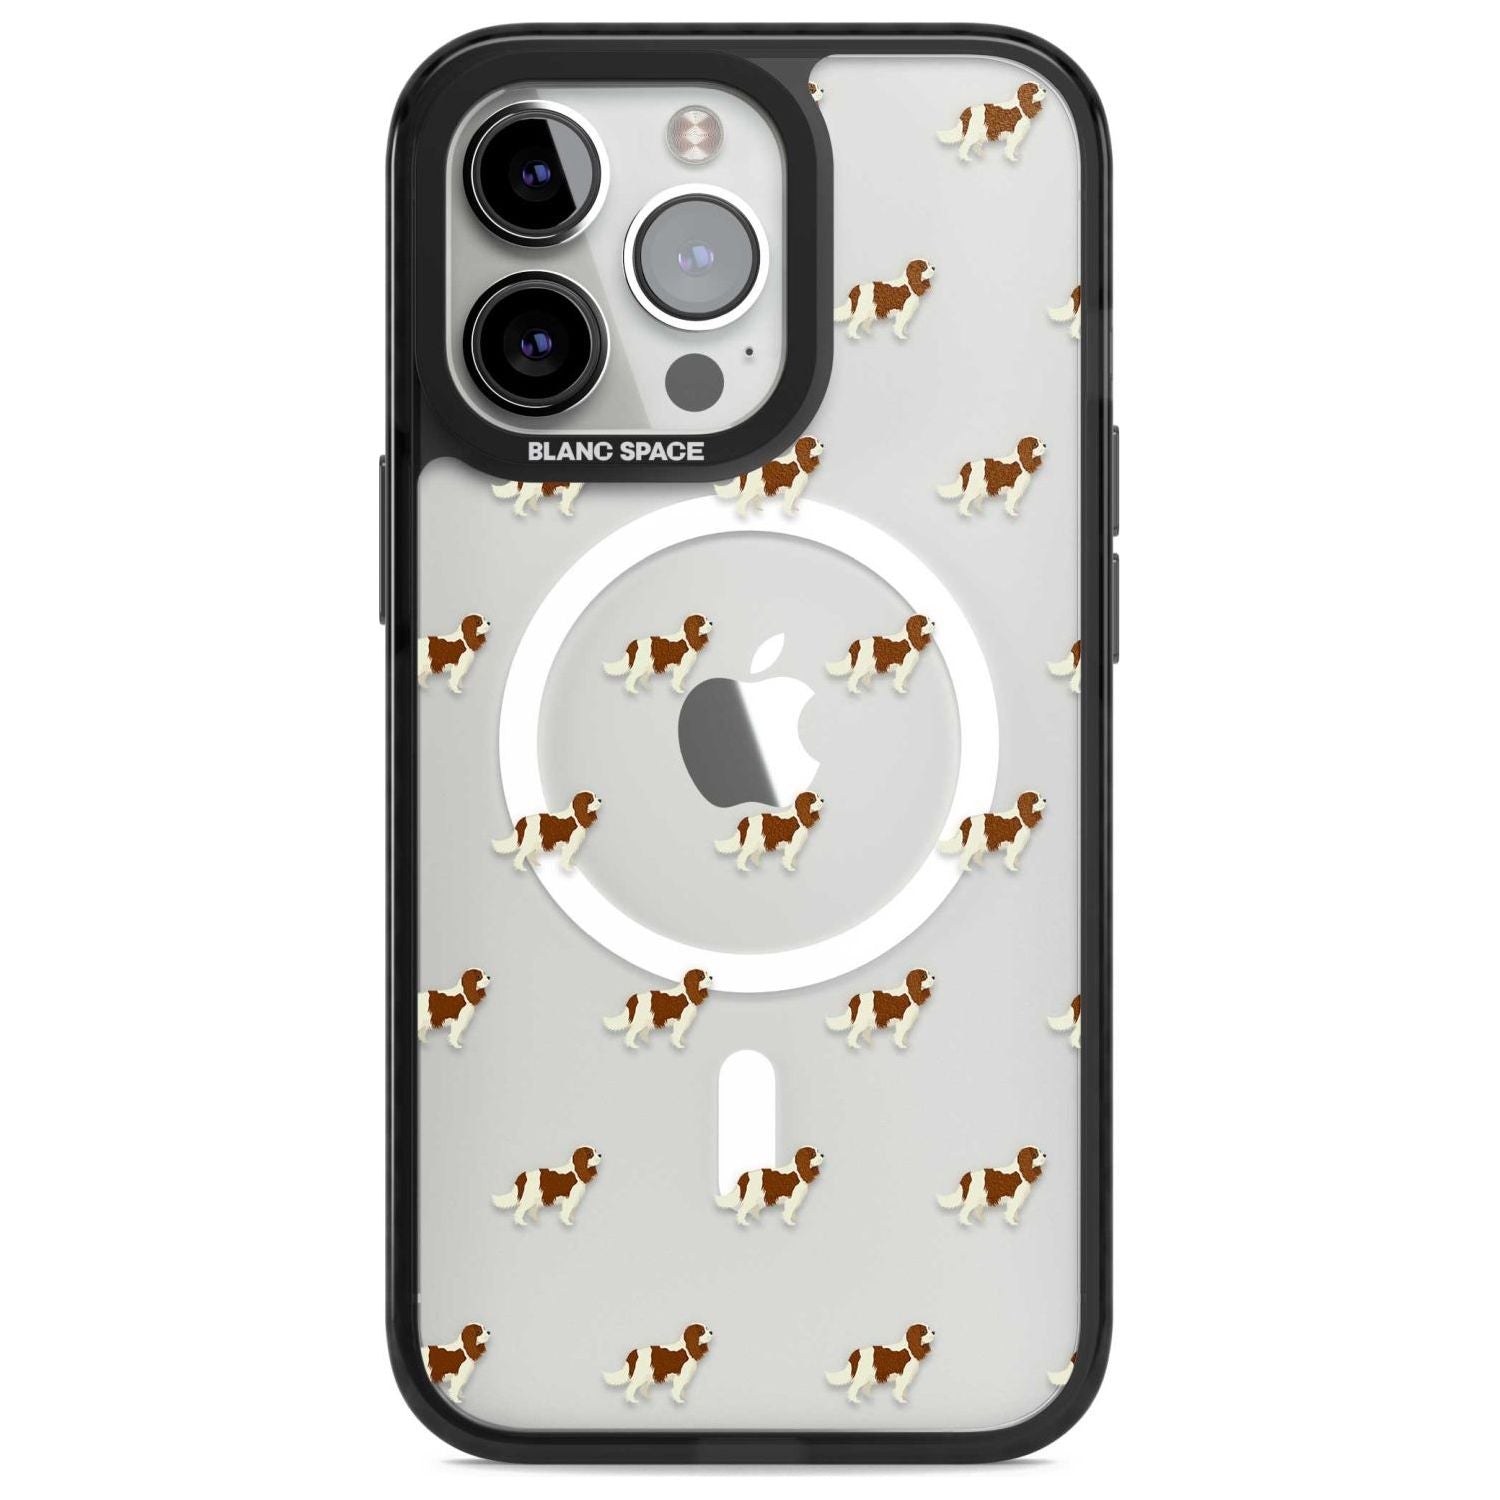 Cavalier King Charles Spaniel Pattern Clear Phone Case iPhone 15 Pro Max / Magsafe Black Impact Case,iPhone 15 Pro / Magsafe Black Impact Case,iPhone 14 Pro Max / Magsafe Black Impact Case,iPhone 14 Pro / Magsafe Black Impact Case,iPhone 13 Pro / Magsafe Black Impact Case Blanc Space